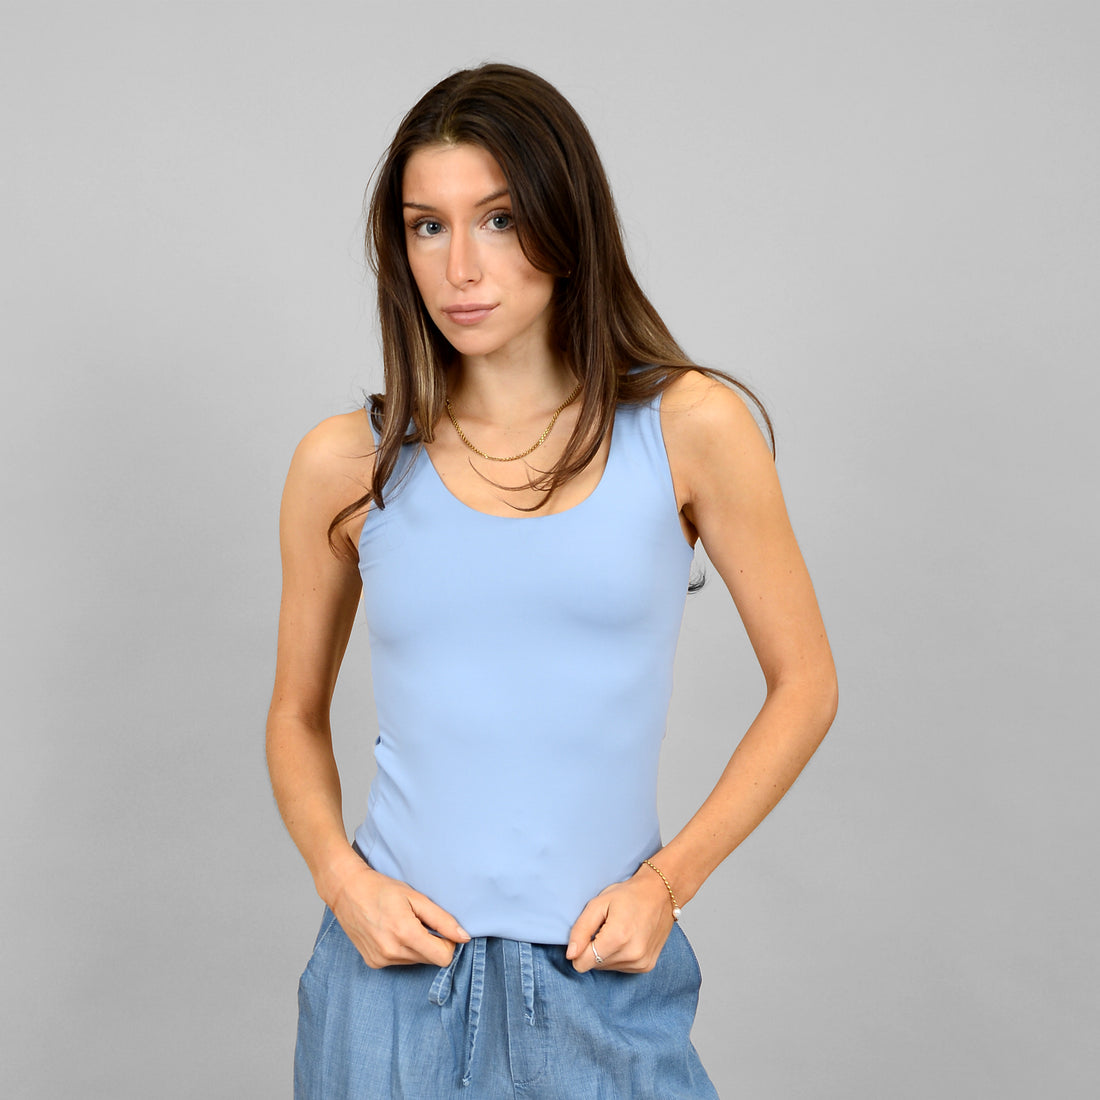 Camisole - Tanith